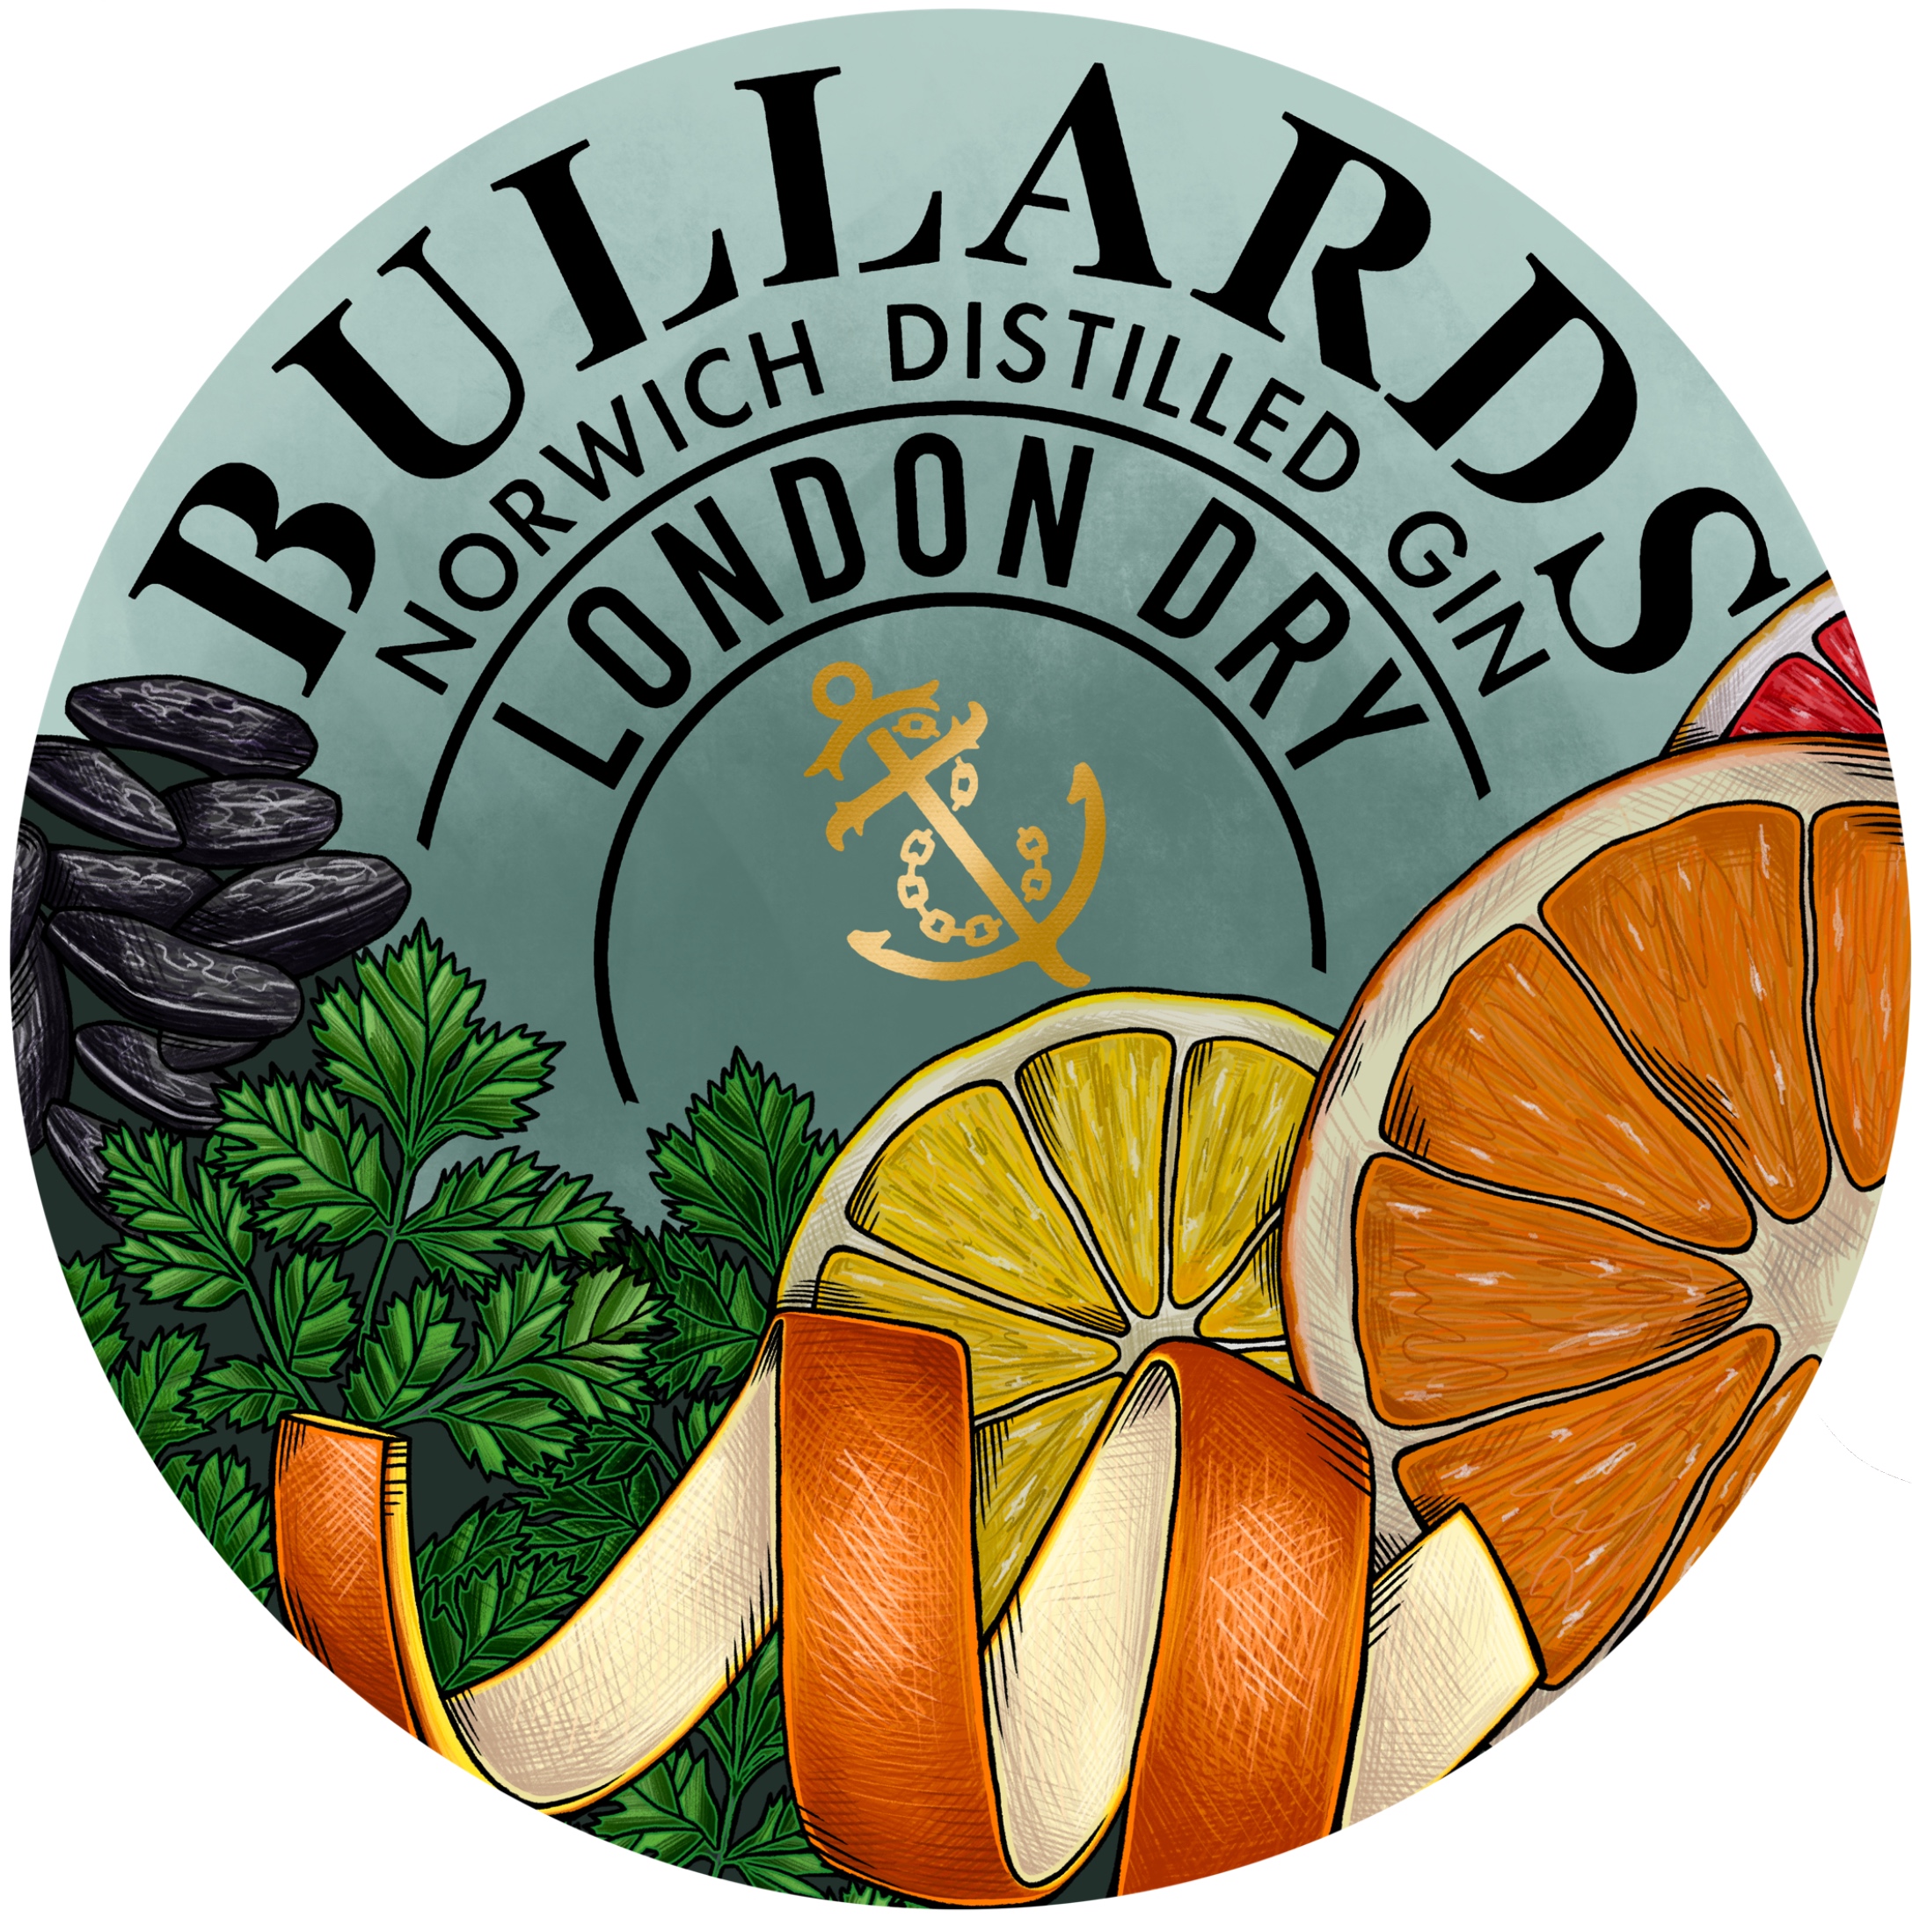 BA Illustration work by Elliott Adams, Showing a label created for Bullards Gin, depicting slices of lemon and orange, curled orange peel, herbs and spices on a blue background